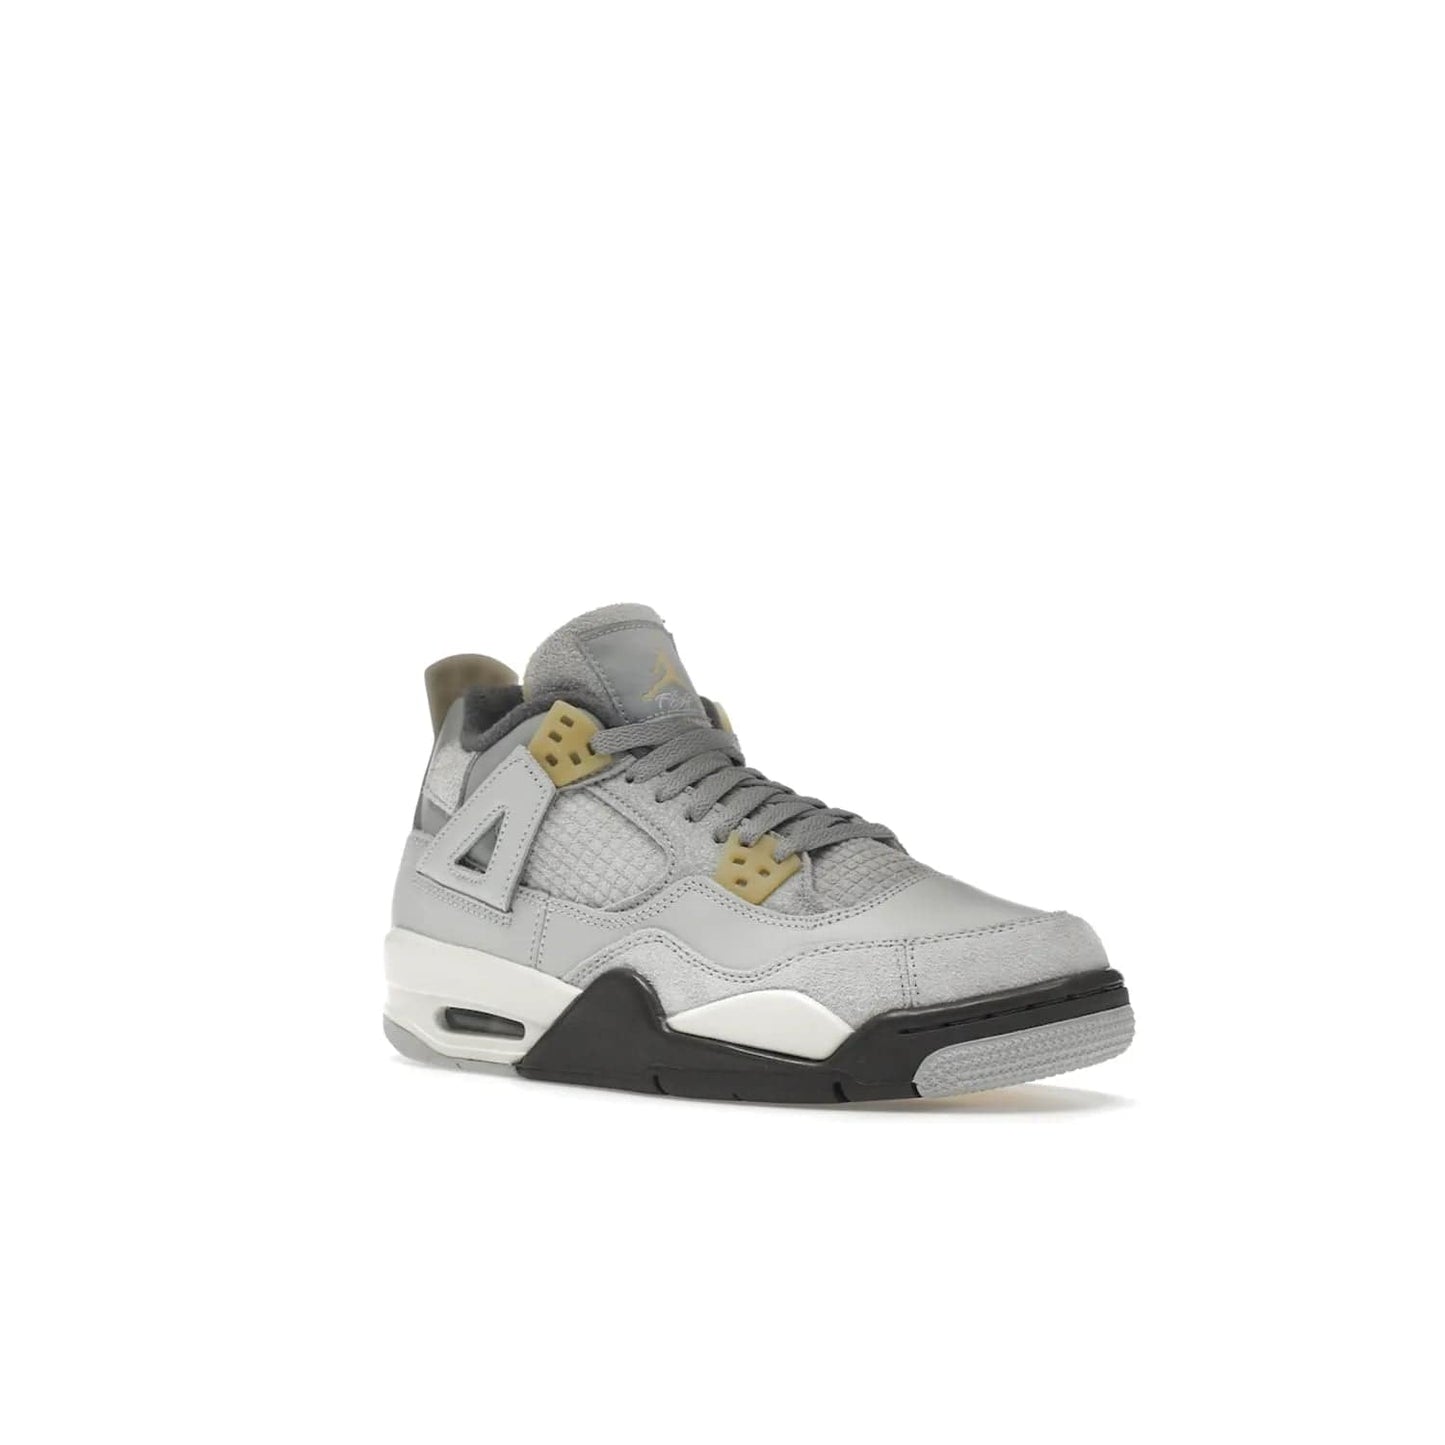 Jordan 4 Retro SE Craft Photon Dust (GS) - Image 5 - Only at www.BallersClubKickz.com - Shop the Jordan 4 Retro SE Craft Photon Dust (GS), the ultimate mix of style and comfort. With photonic dust, pale vanilla, off-white, grey fog, flat pewter and sail colorway, foam midsole, and rubber outsole, don't miss this special edition Jordan 4 releasing Feb 11, 2023.